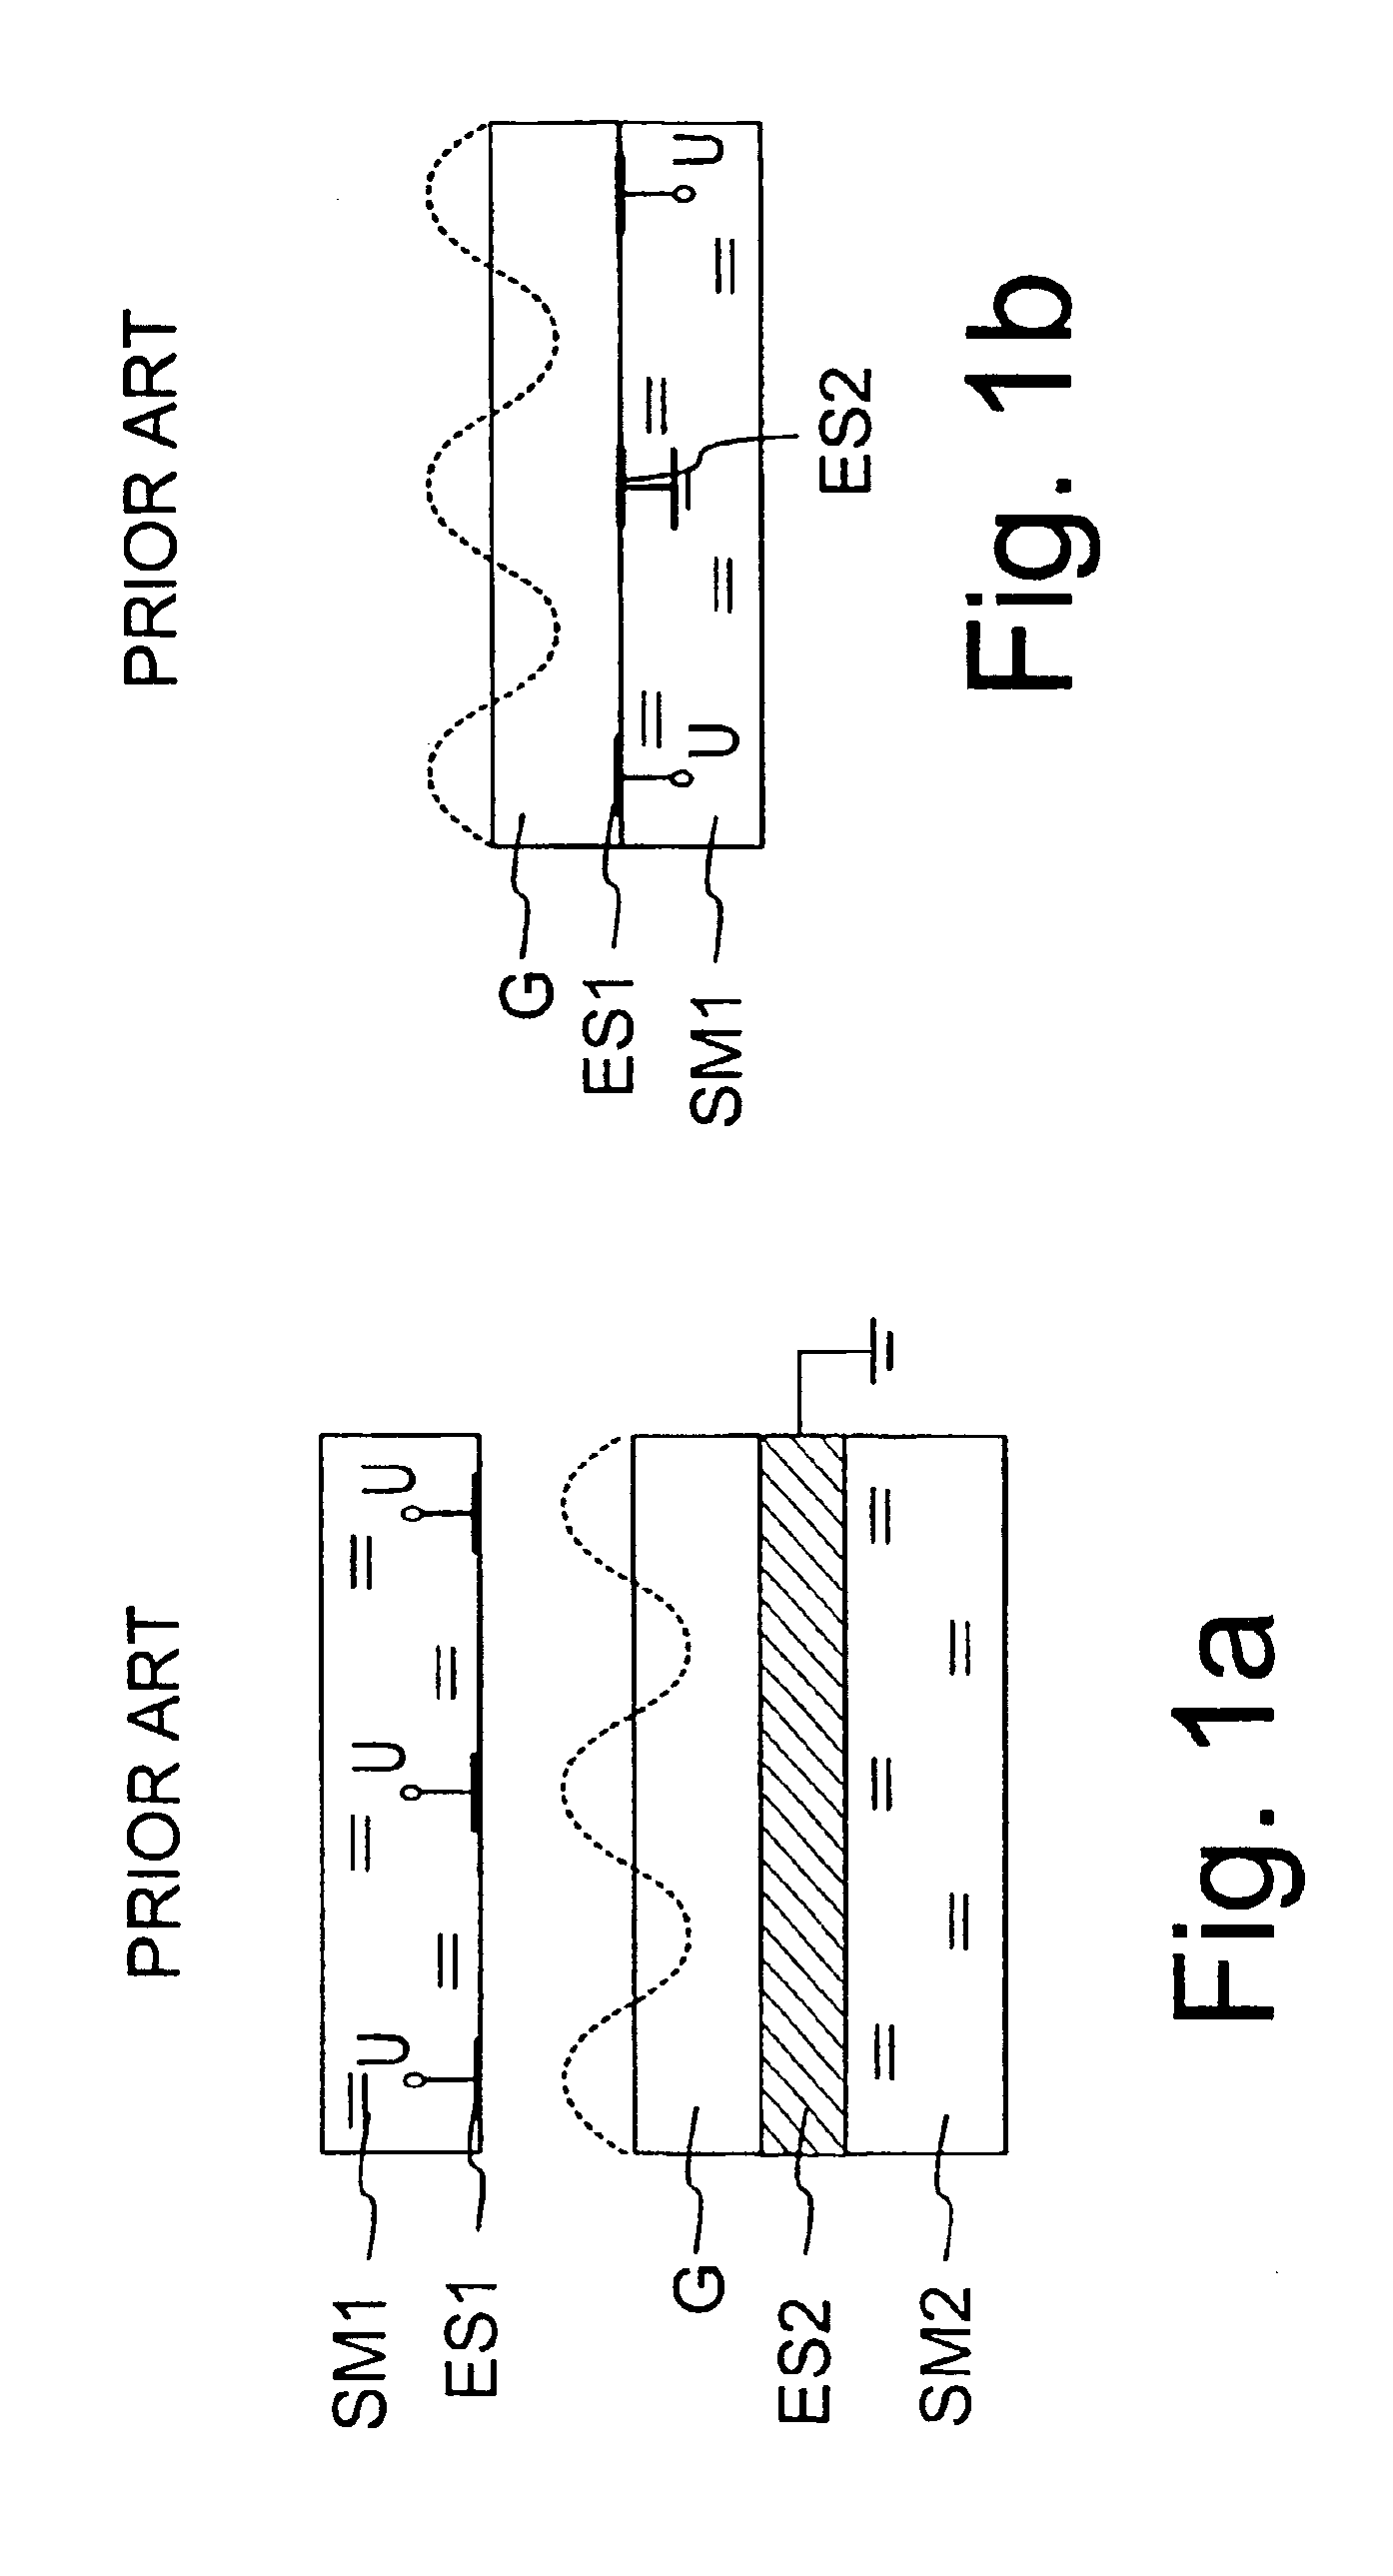 Electrically reconfigurable optical devices